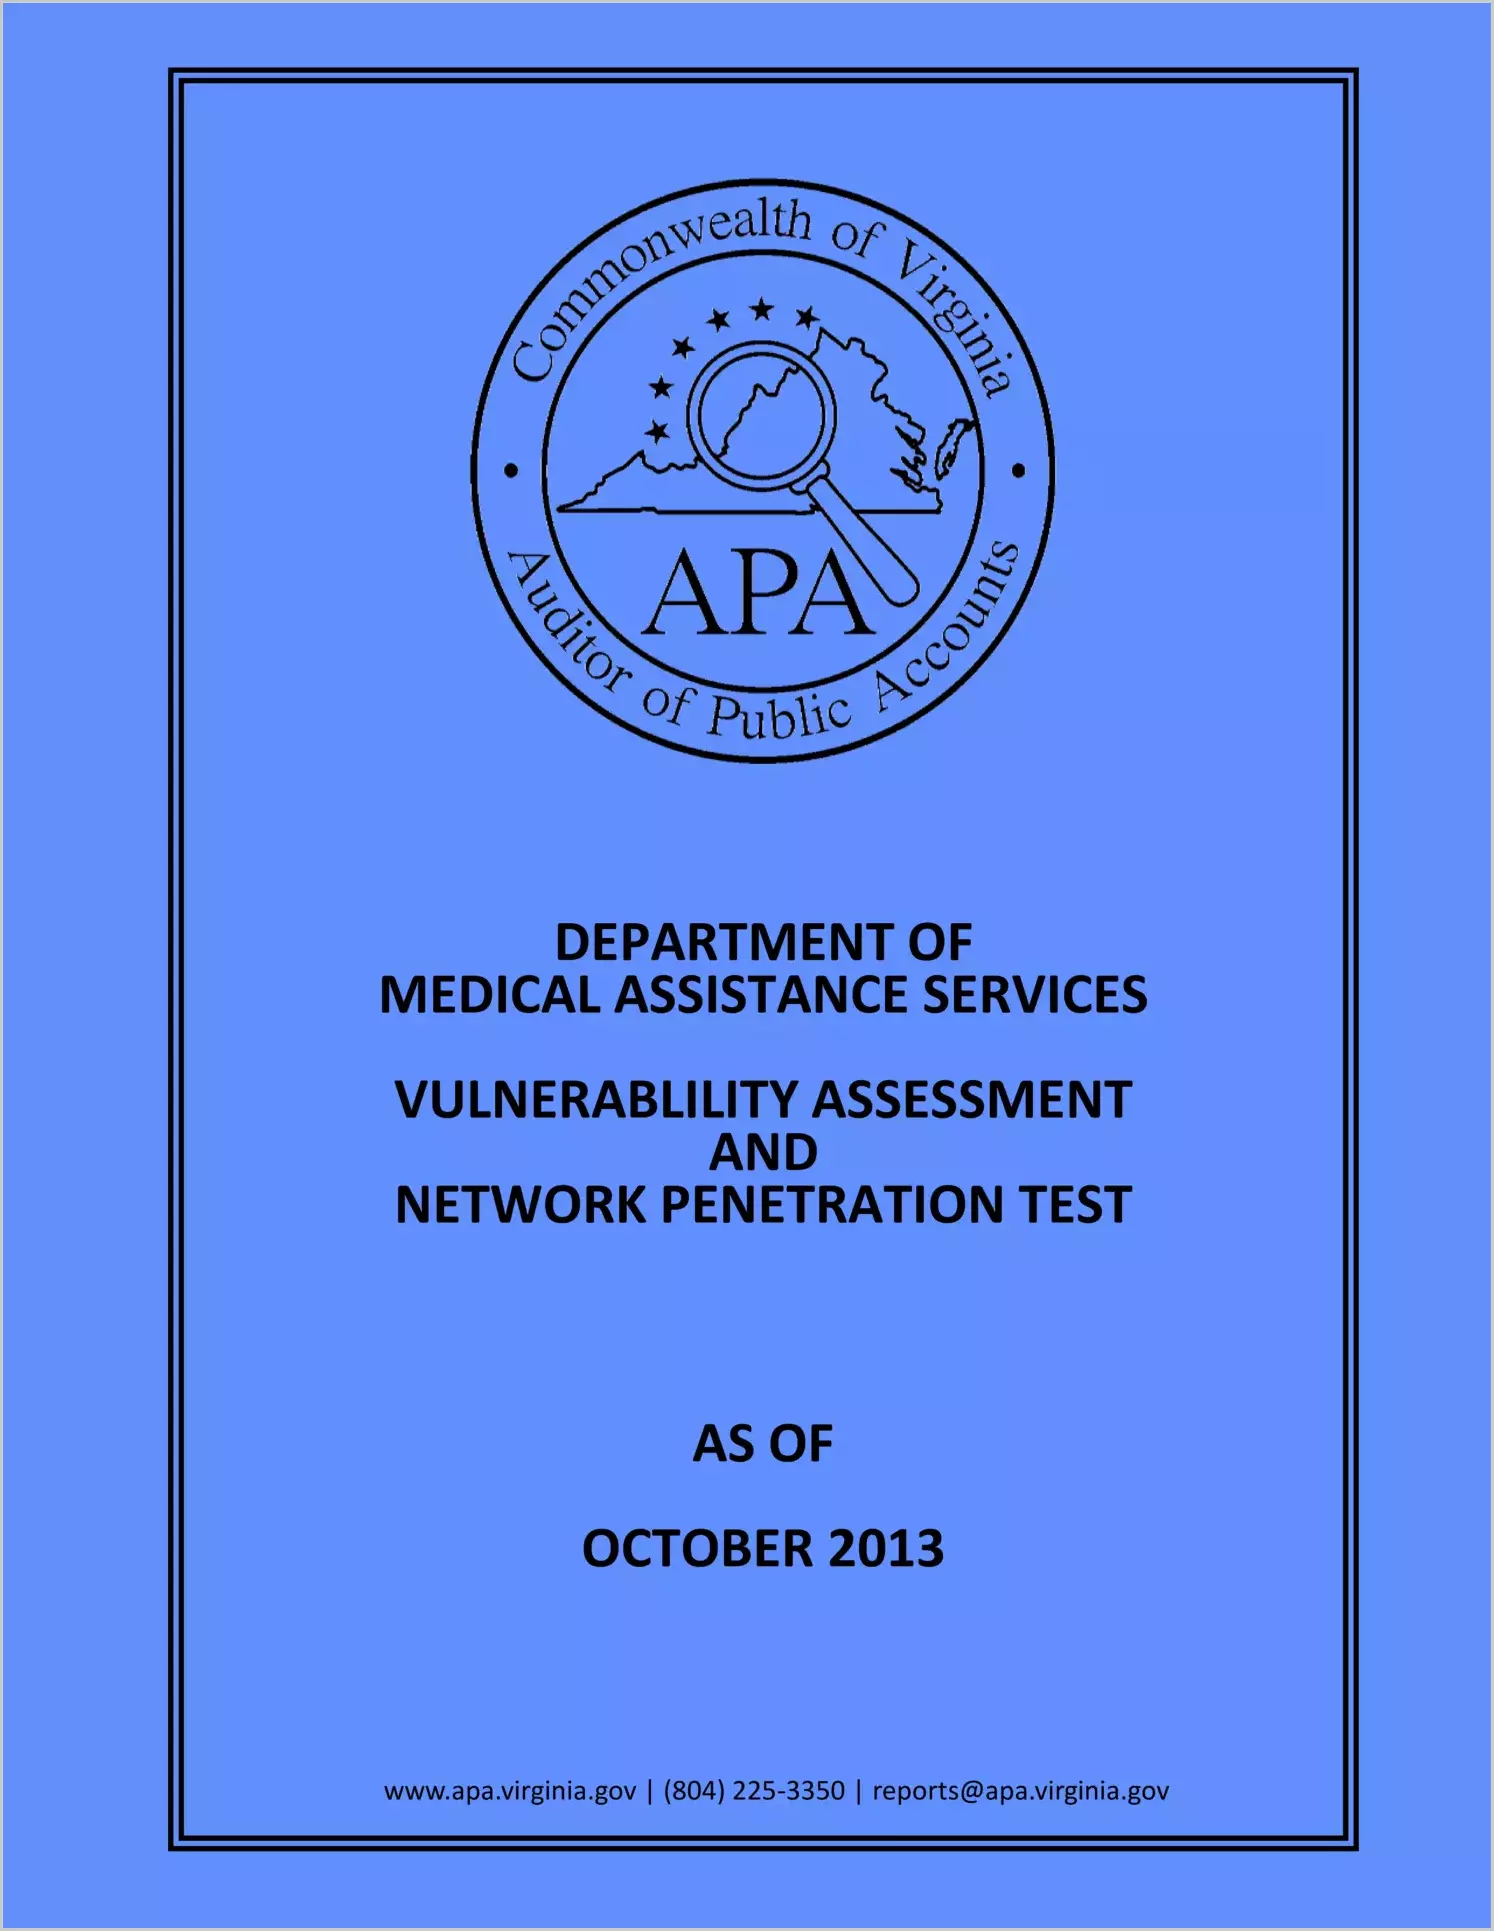 Department of Medical Assistance Services Vulnerability Assessment and Network Penetration Test as of October 2013